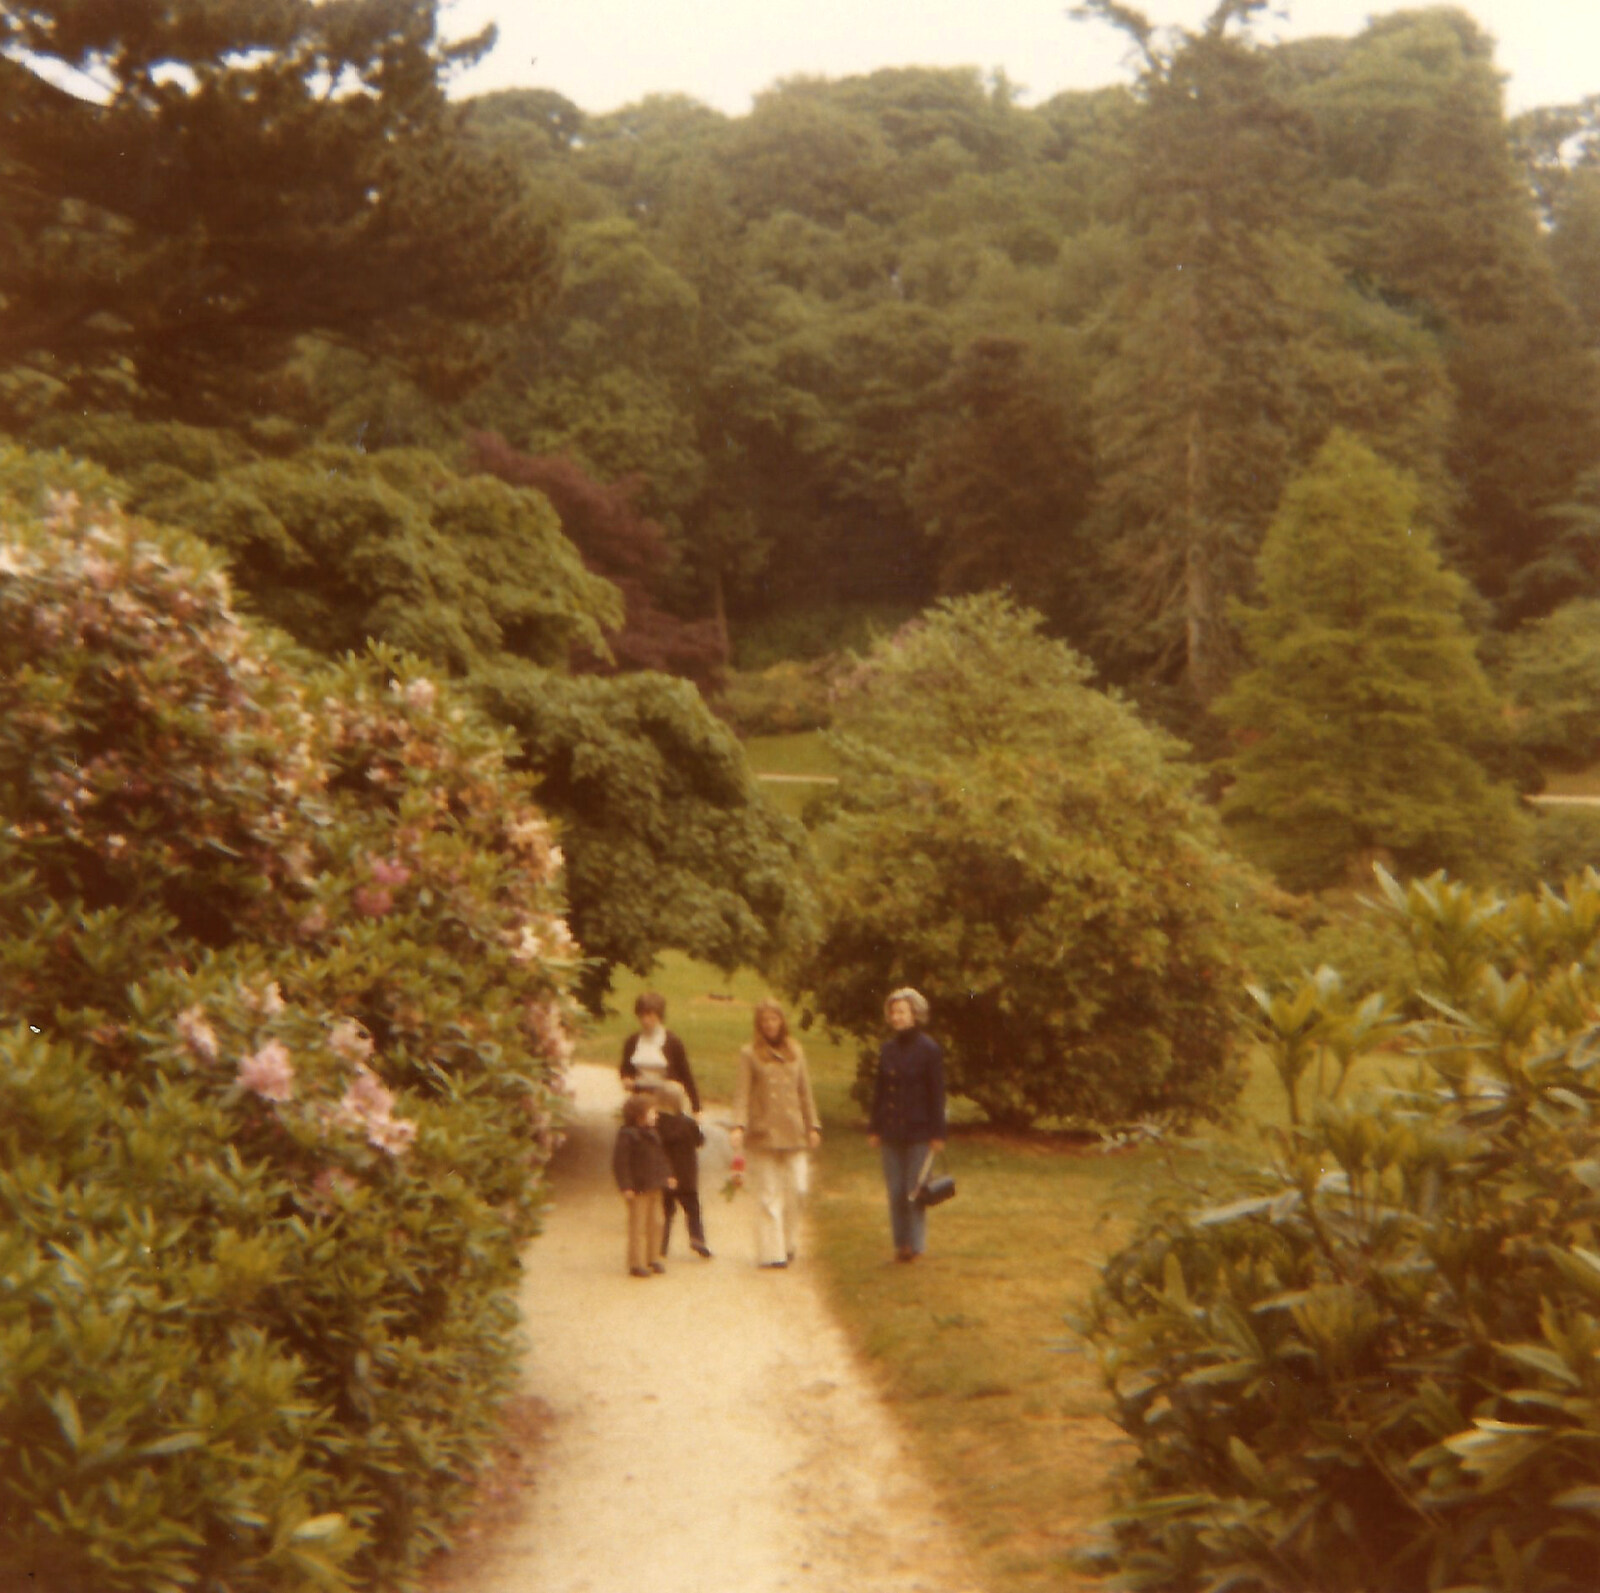 A walk in some formal gardens, possibly Alton Towers (before it was a theme park) from Family History: The 1970s, Timperley and Sandbach, Cheshire - 24th January 2020